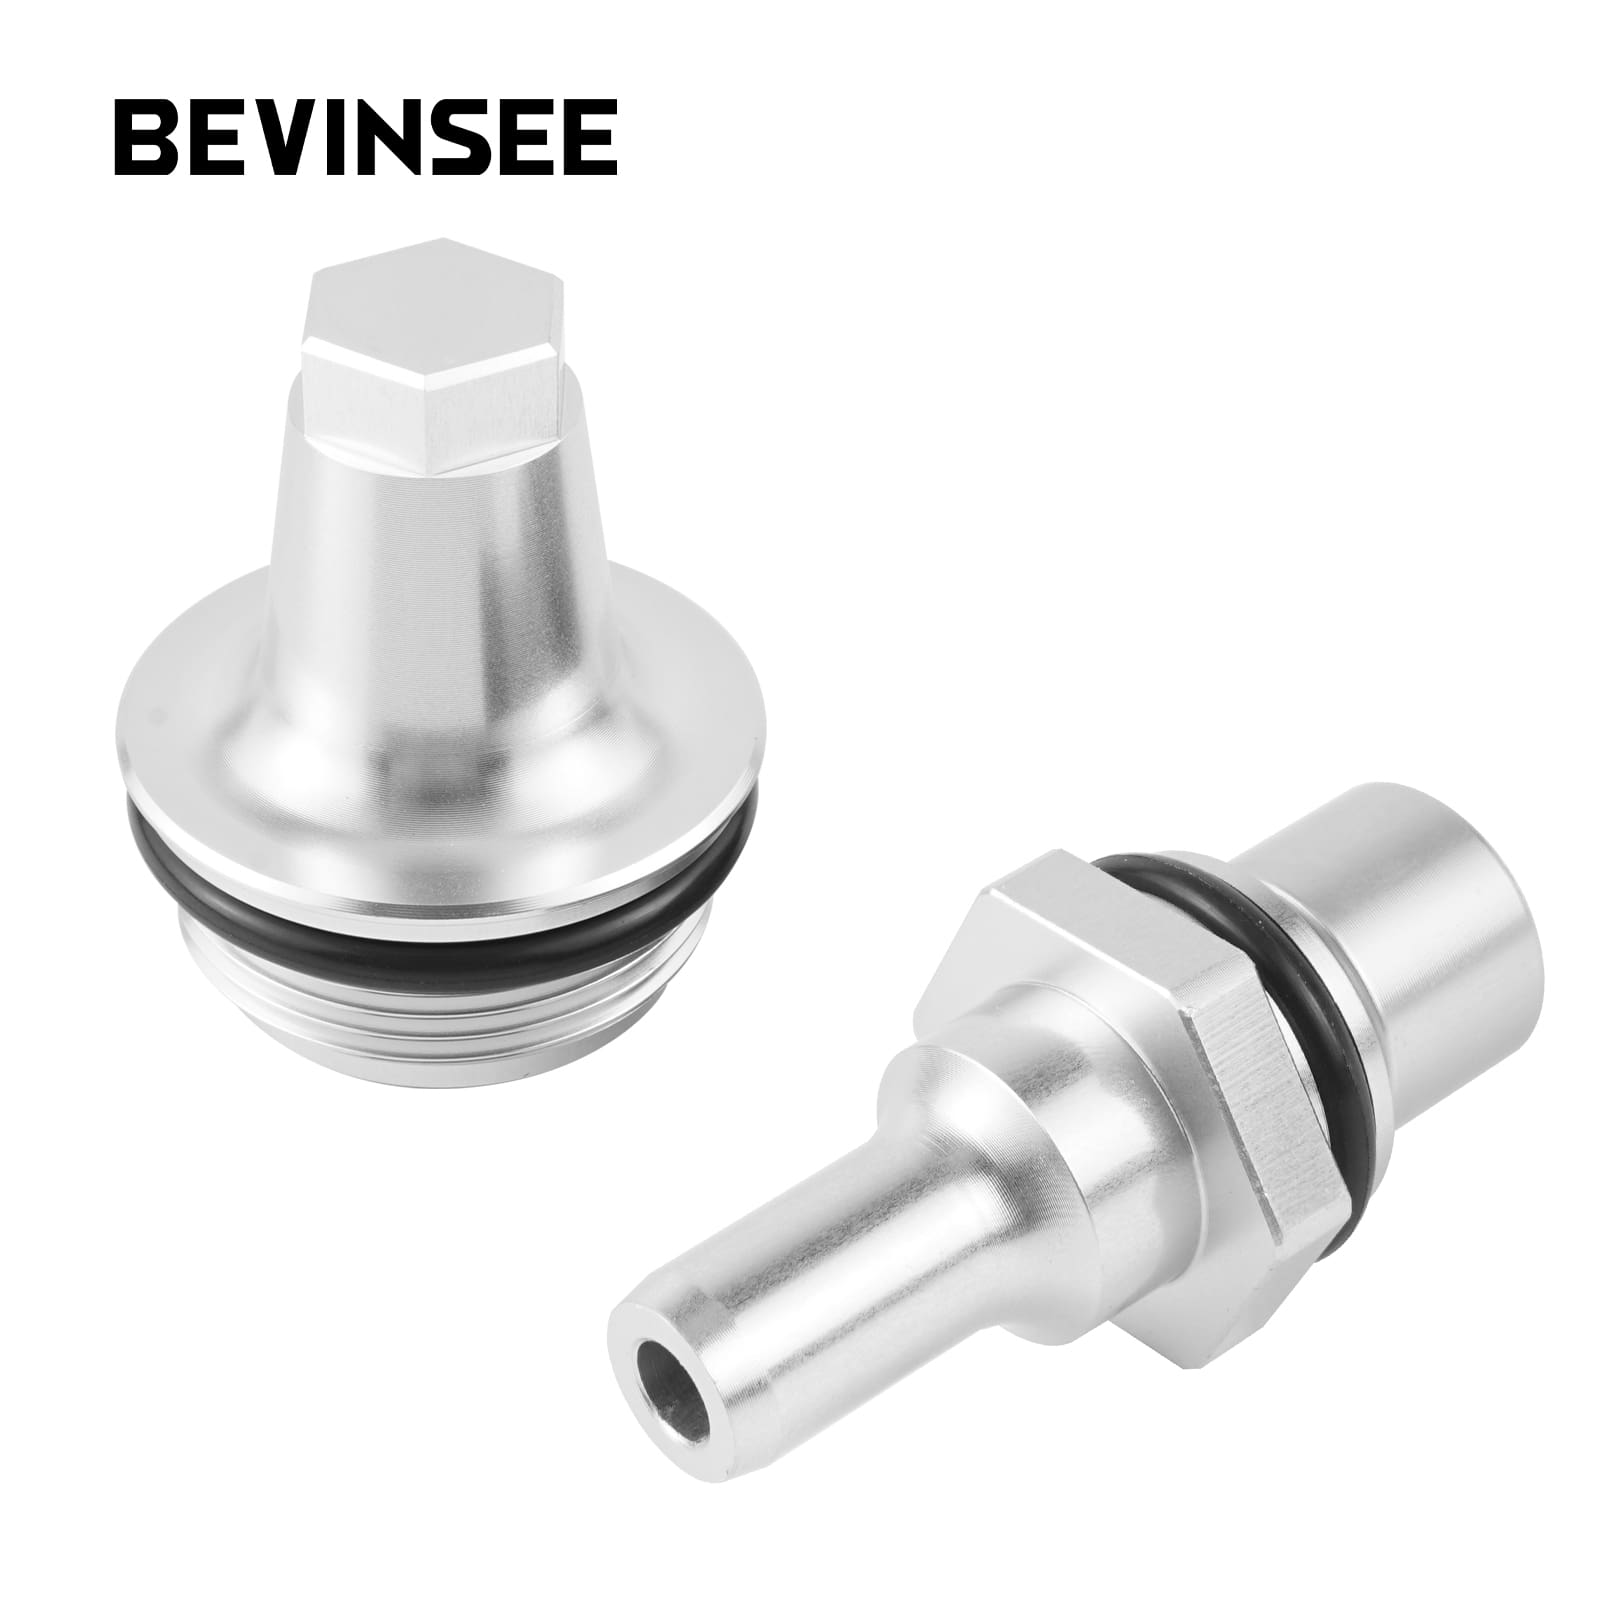 BEVINSEE For N54 Aluminum PCV Cap Cover Upgrade For BMW E82 E88 E89 E90 E91 E92 E93 E60 E61 E71 135i 335i 535i X6 Z4 Twin Turbo Engines